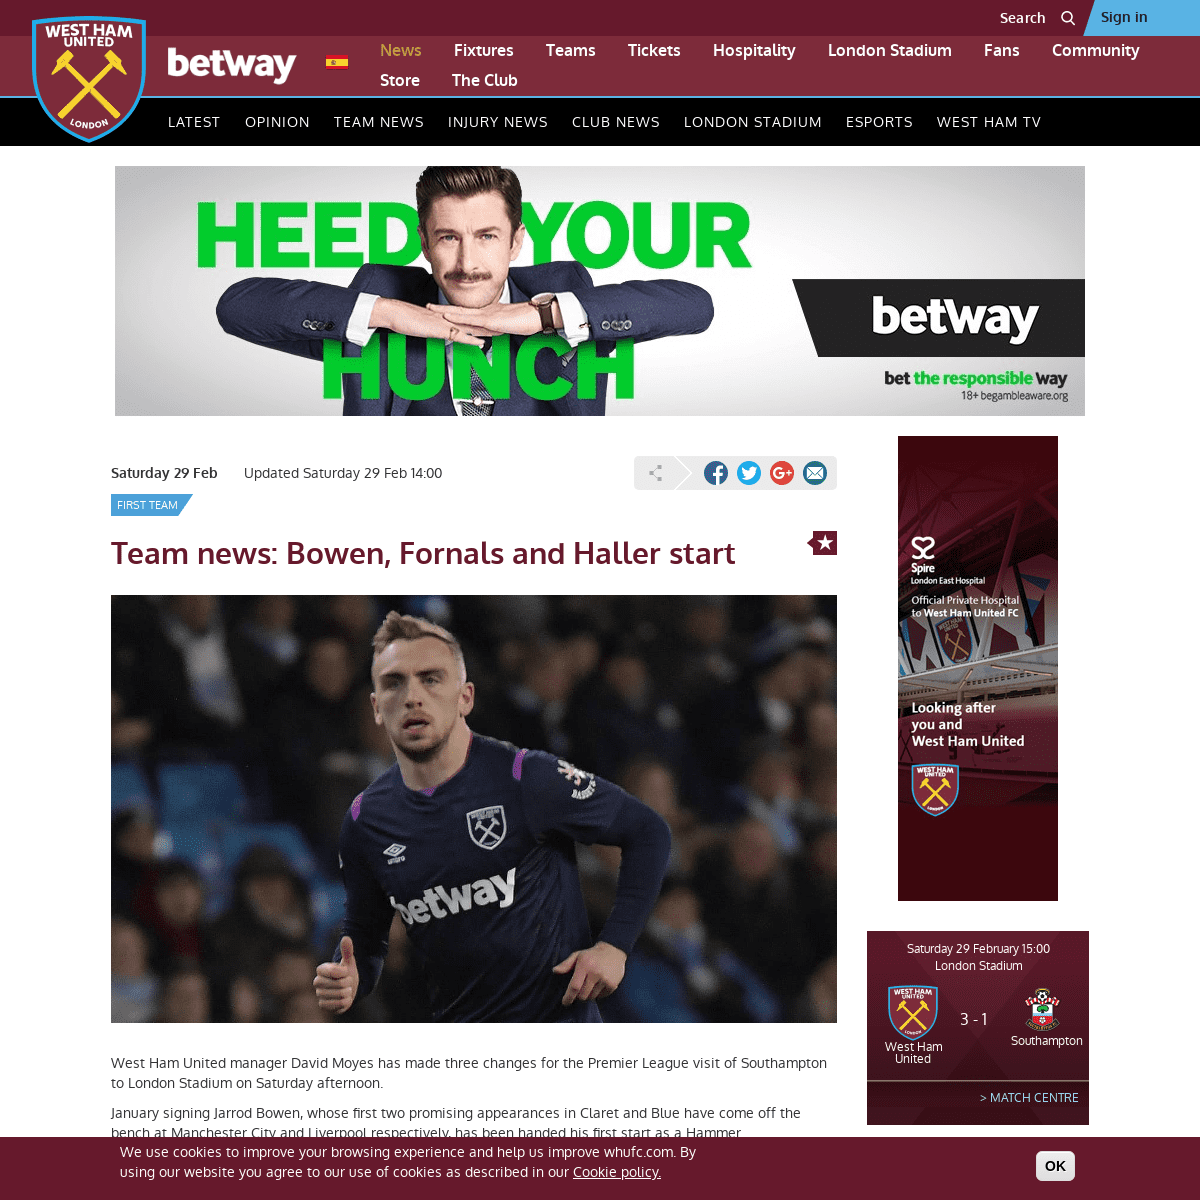 A complete backup of www.whufc.com/news/articles/2020/february/29-february/team-news-bowen-fornals-and-haller-start